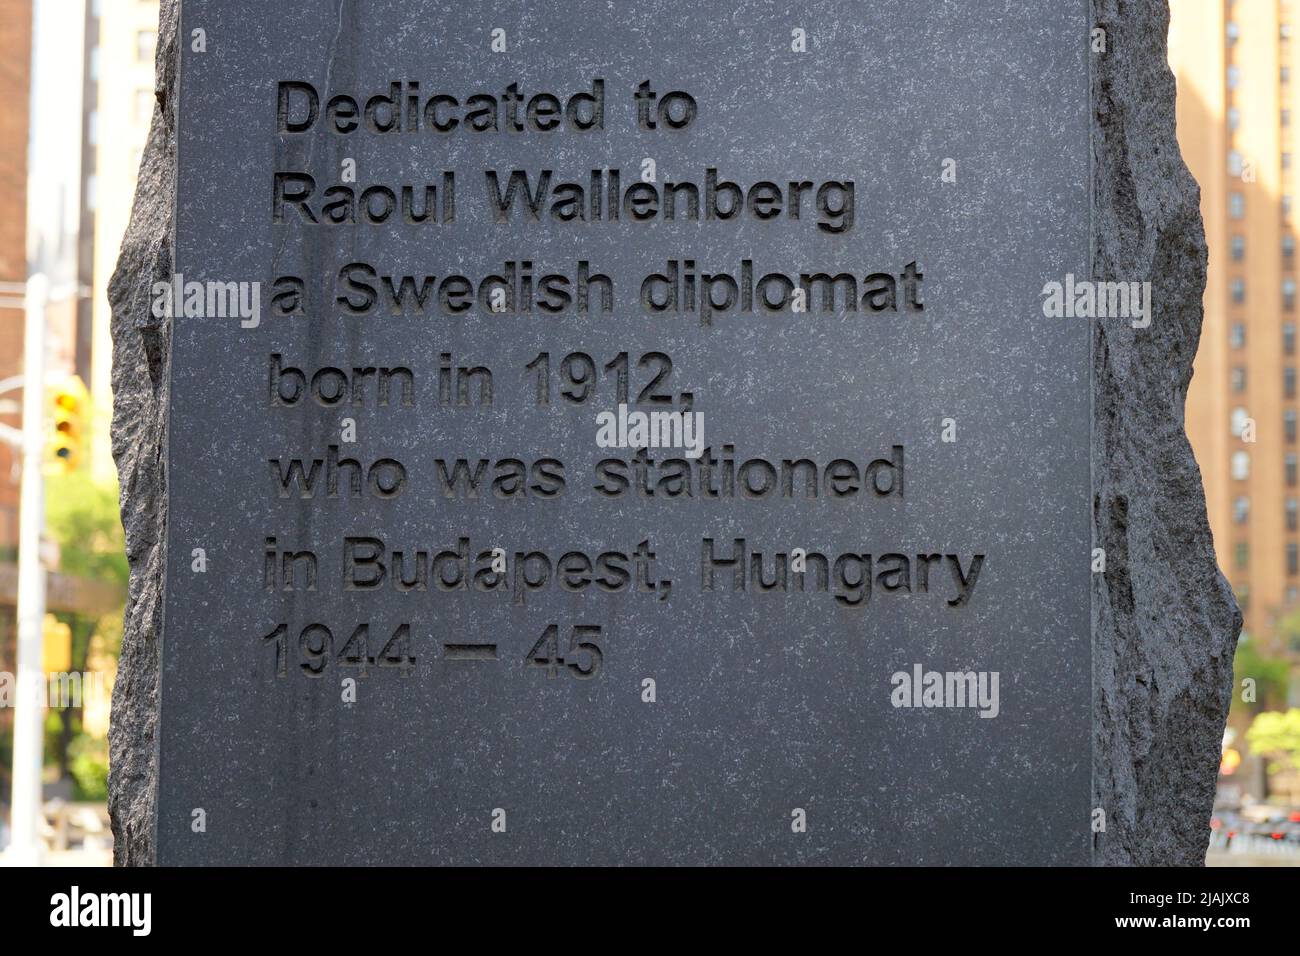 Raoul Wallenberg Monument, at the United Nations Plaza, detail, dedication inscription carved in stone, New York, NY, USA Stock Photo